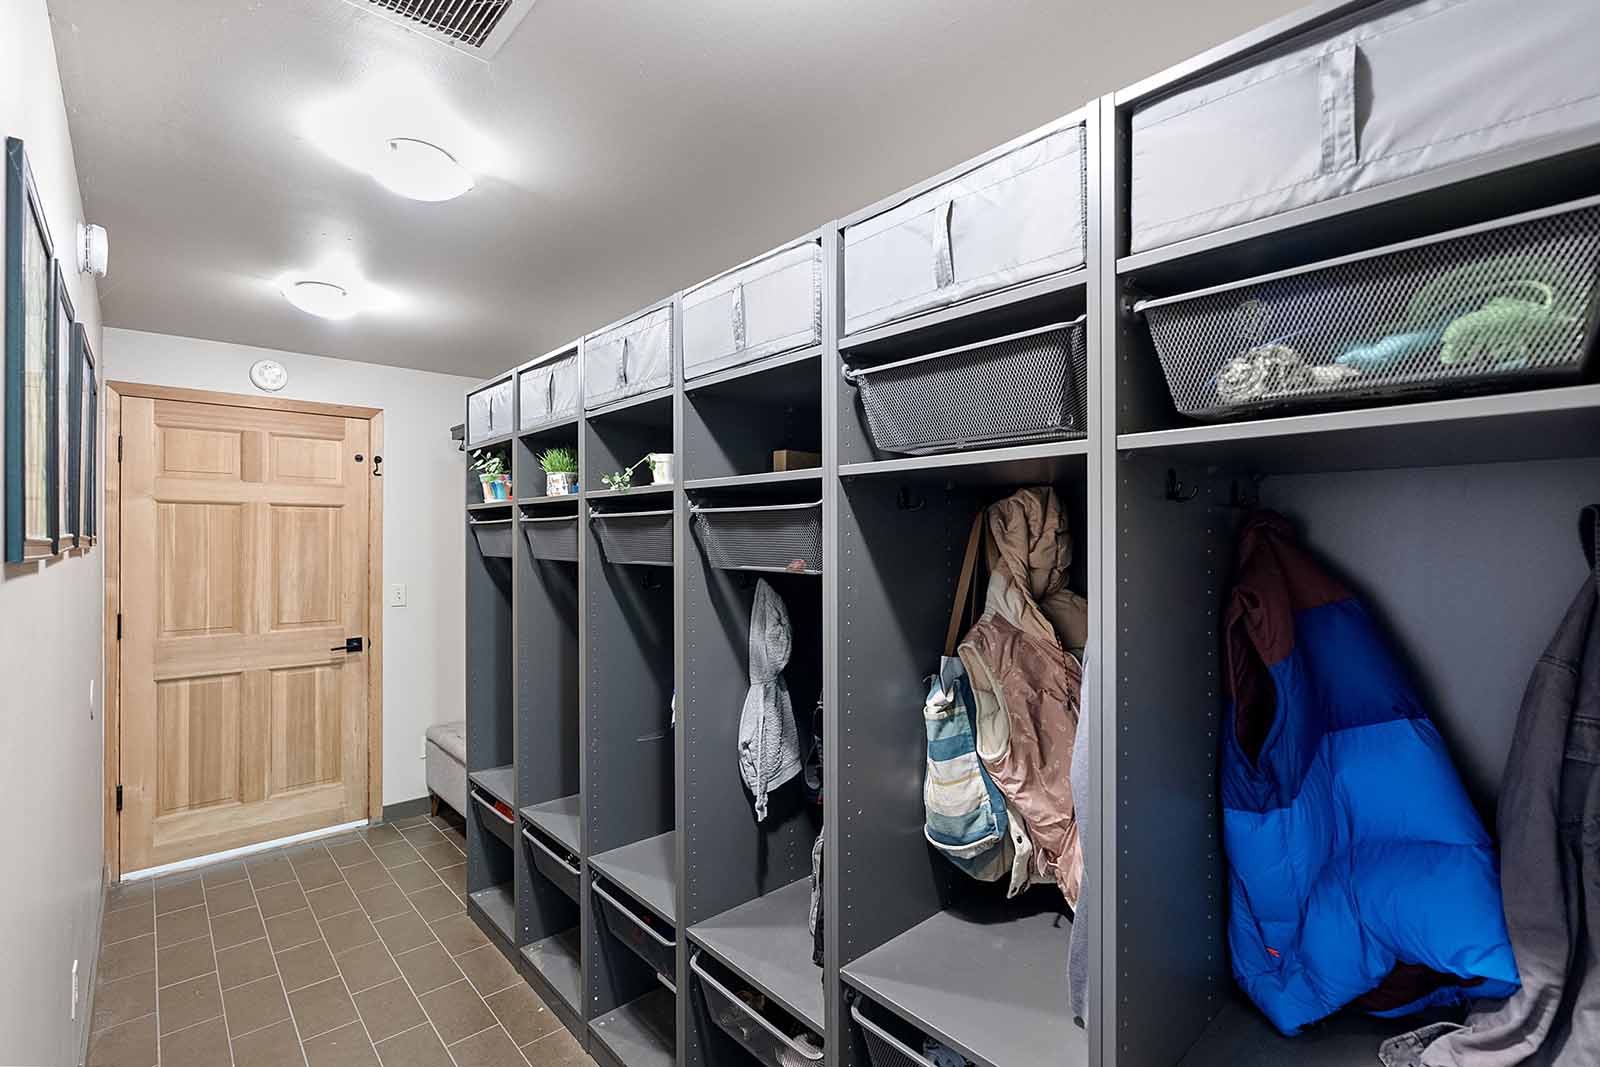 Mudroom on the lower level offers access to attached garage